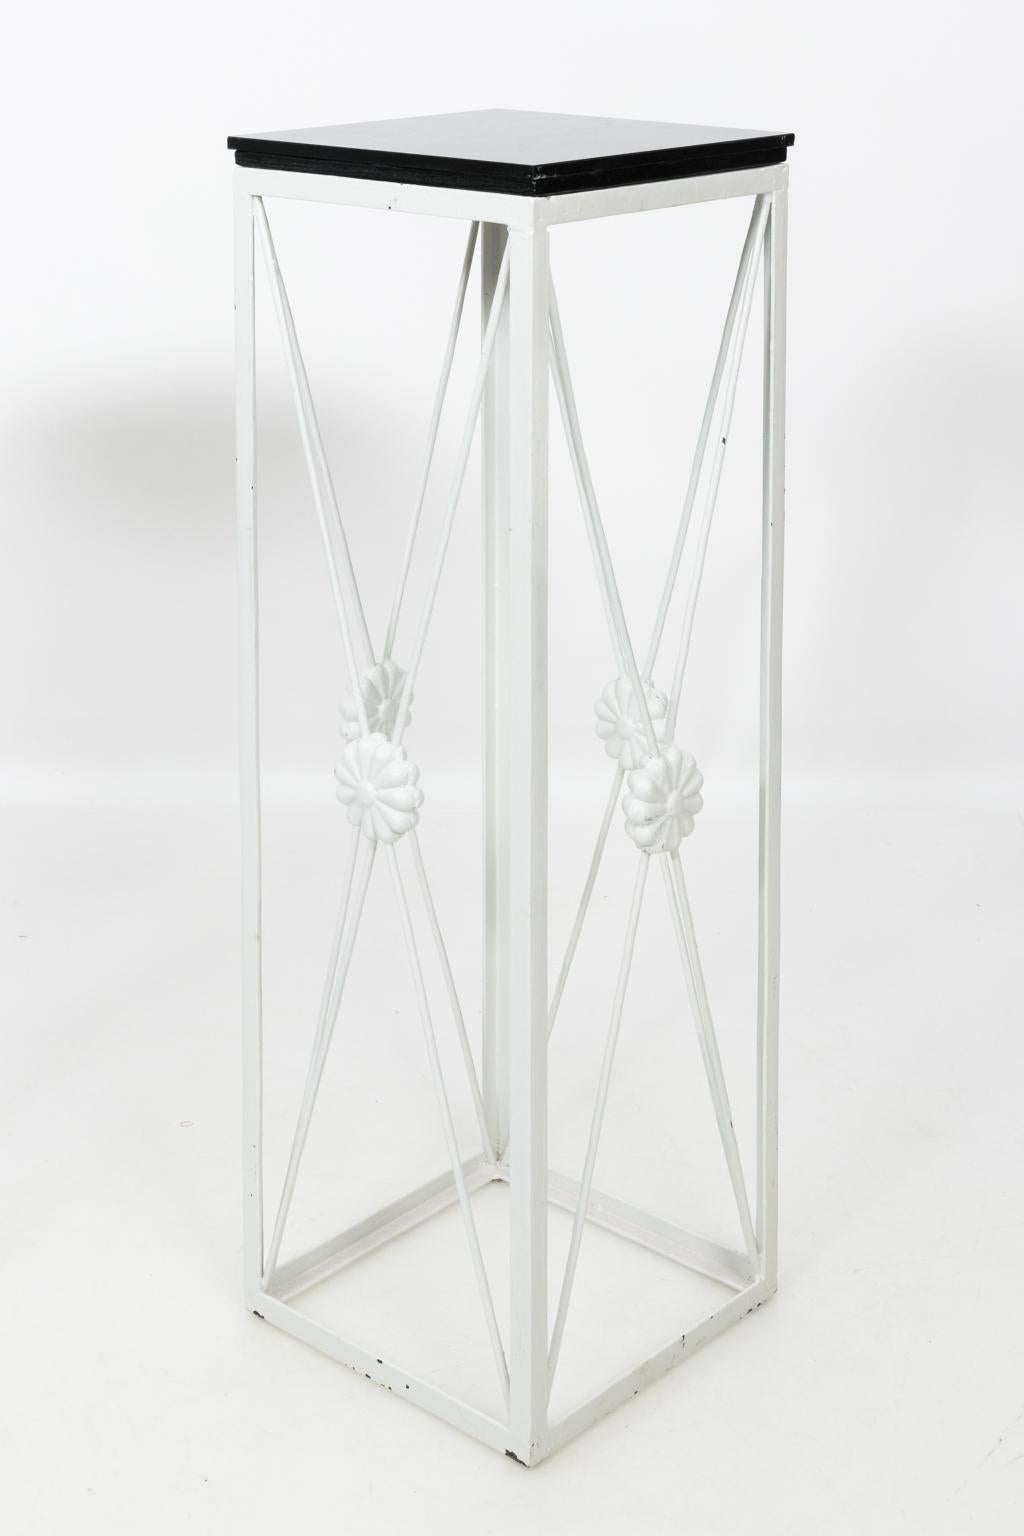 Pair of white painted Iron plant stands with black marble tops and flower latticework medallions, circa 1990.
 